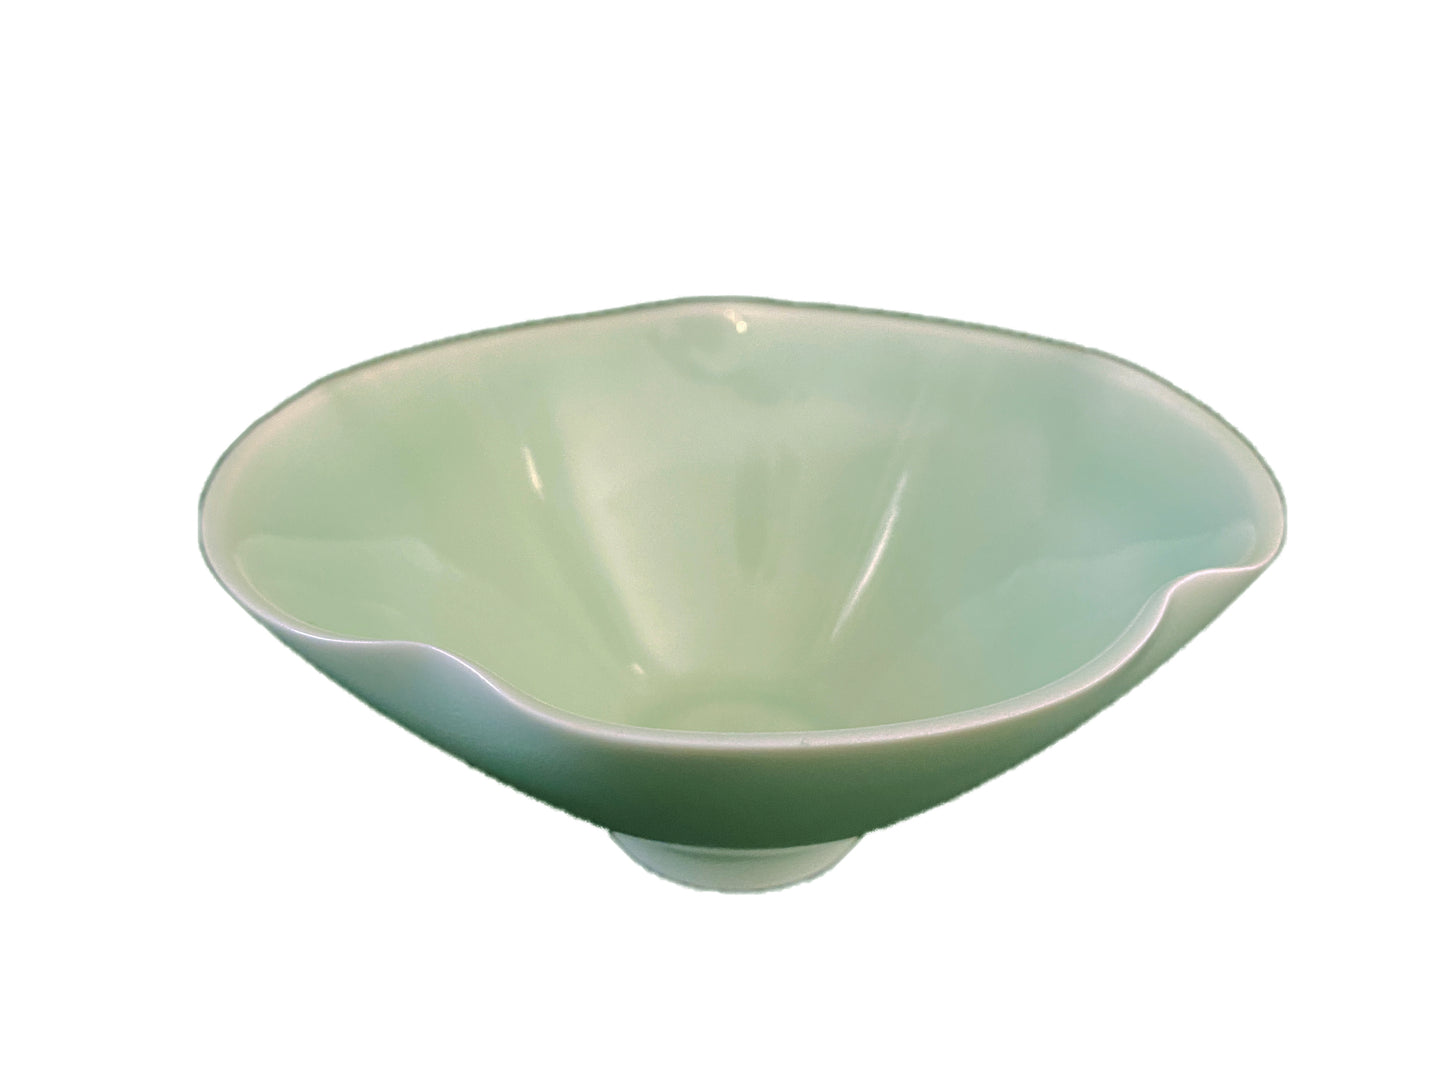 #3980 Song Dynasty Style Celadon Bowl